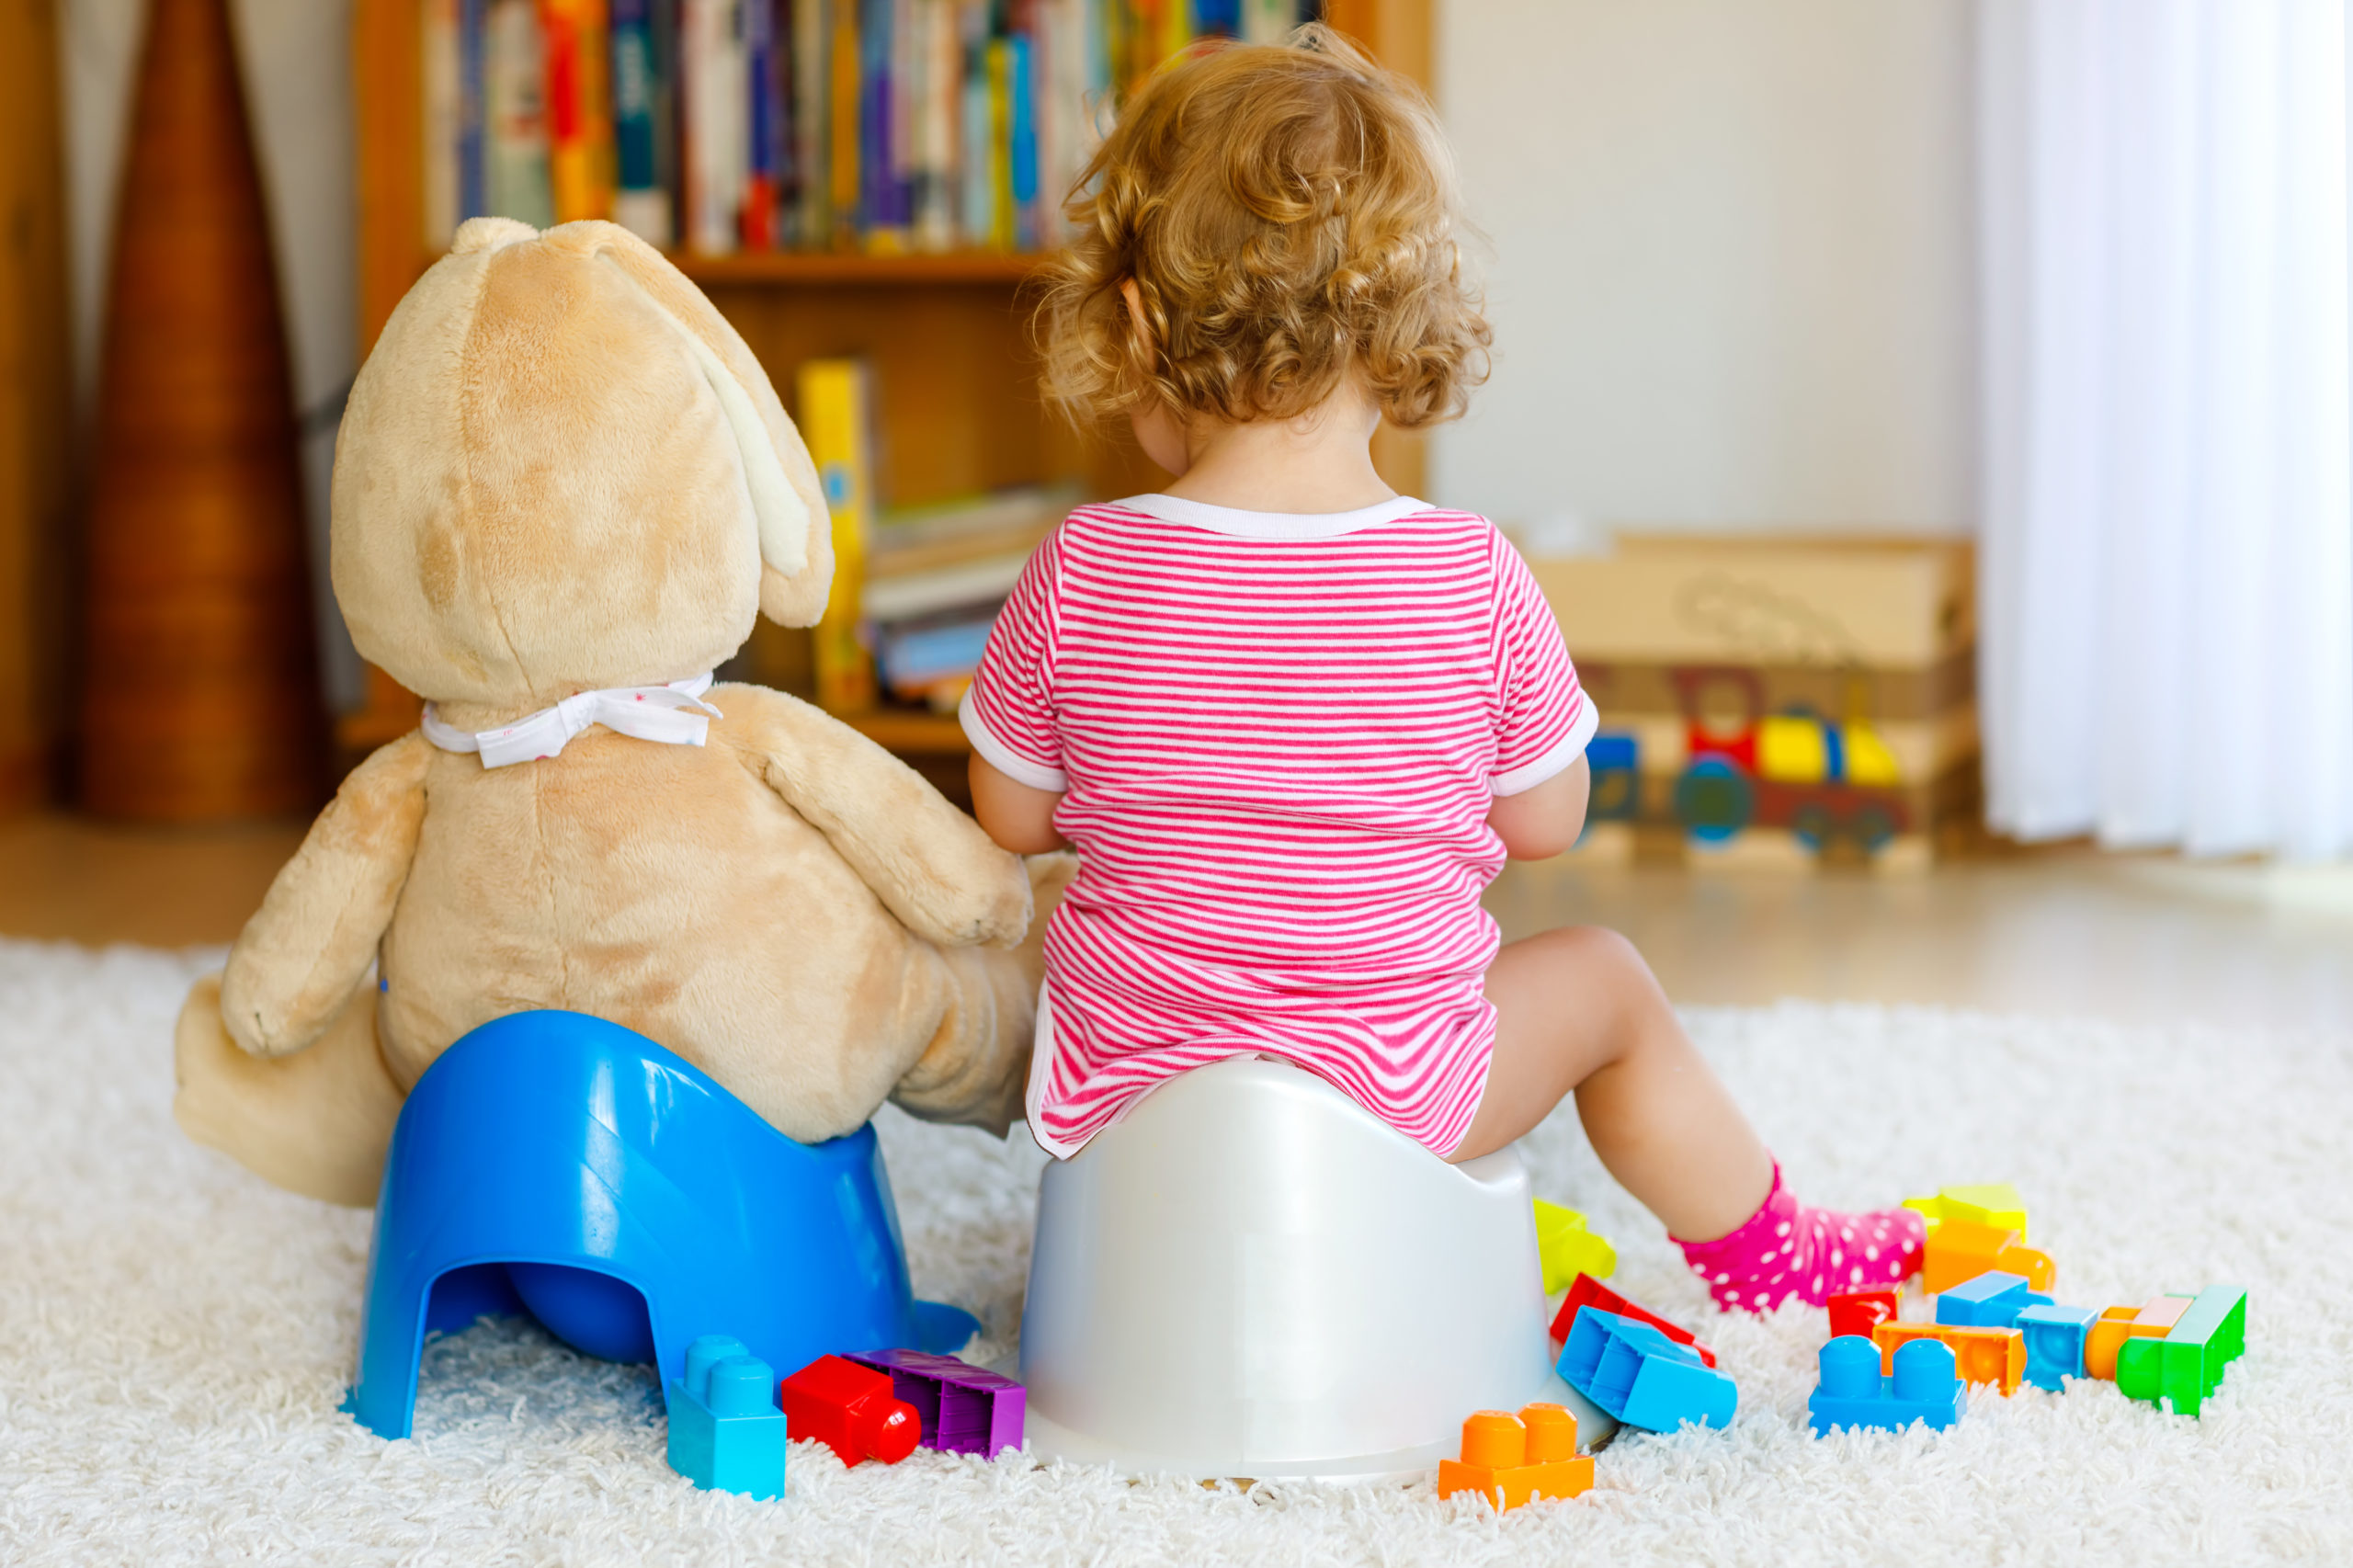 How Do I Prepare My Child For Potty Training Support For Parents From Action For Children